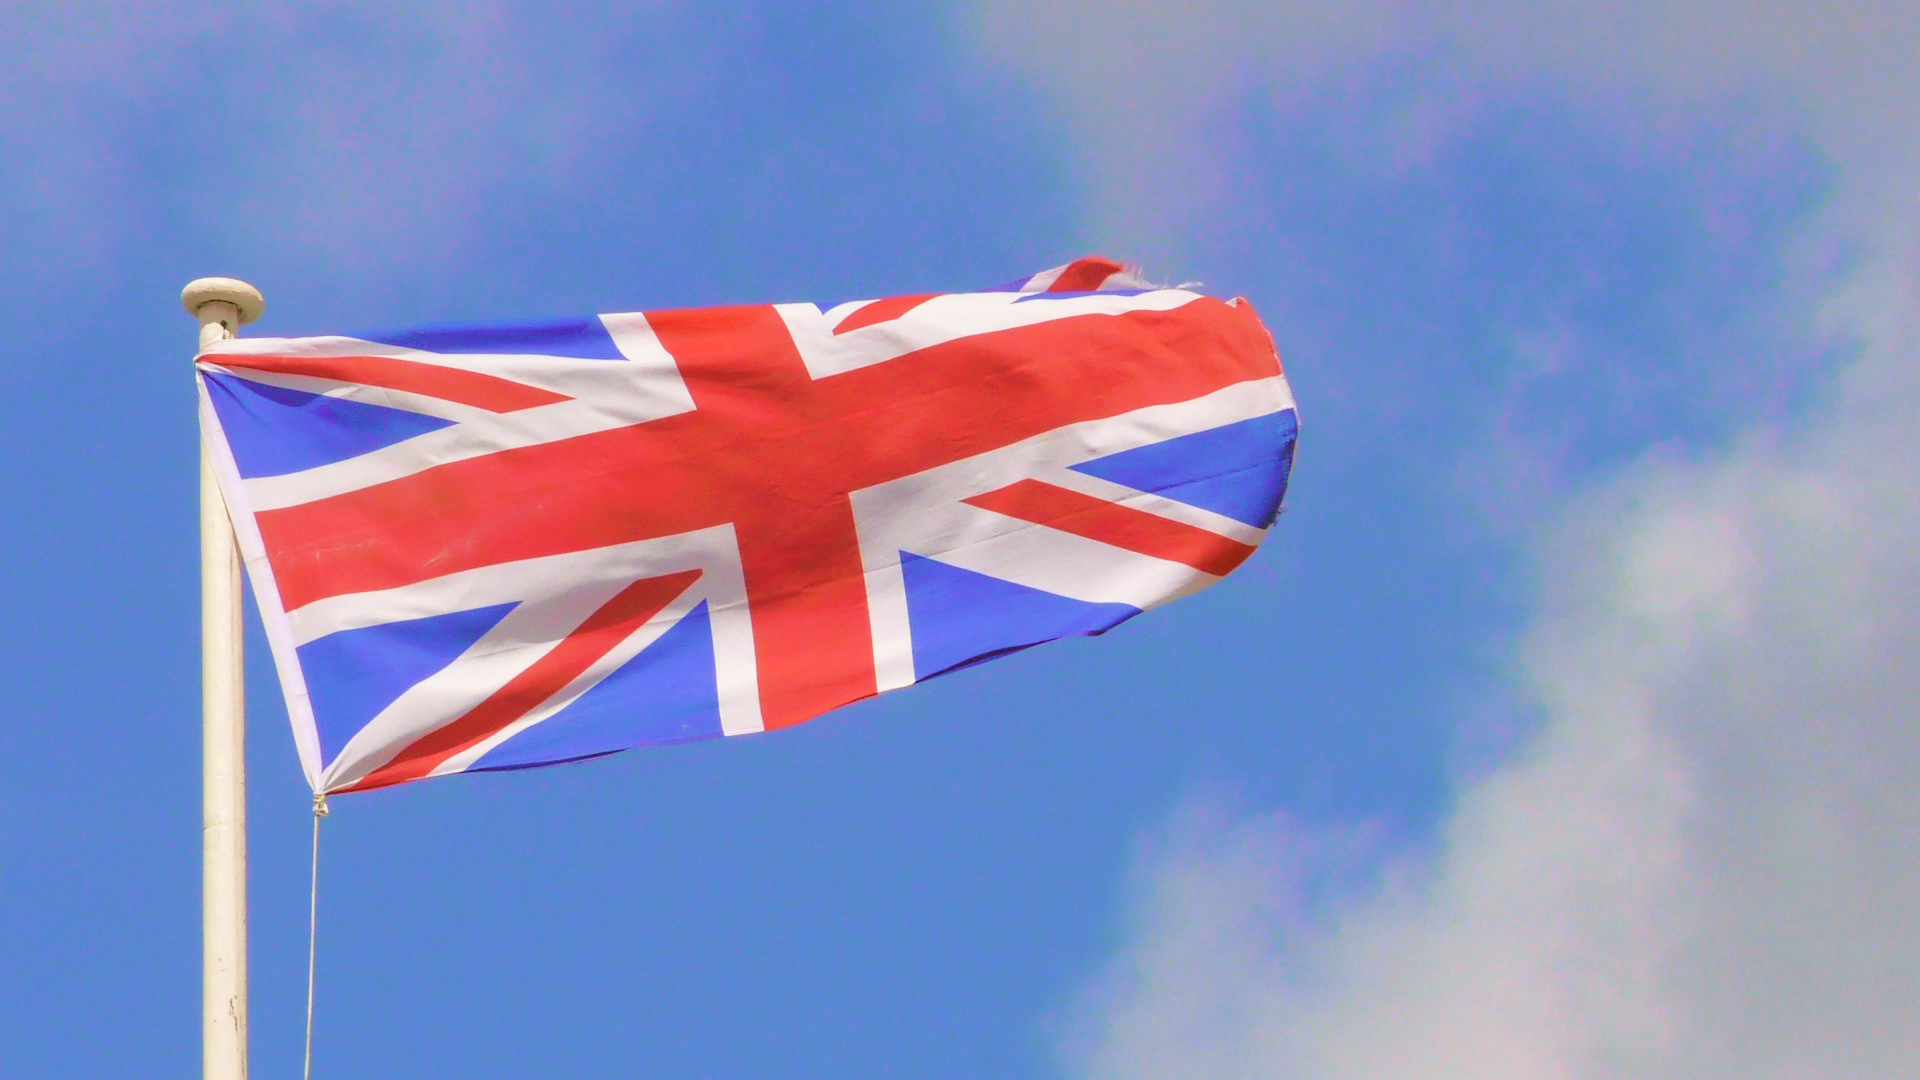 The flag of Great Britain in a blue background.